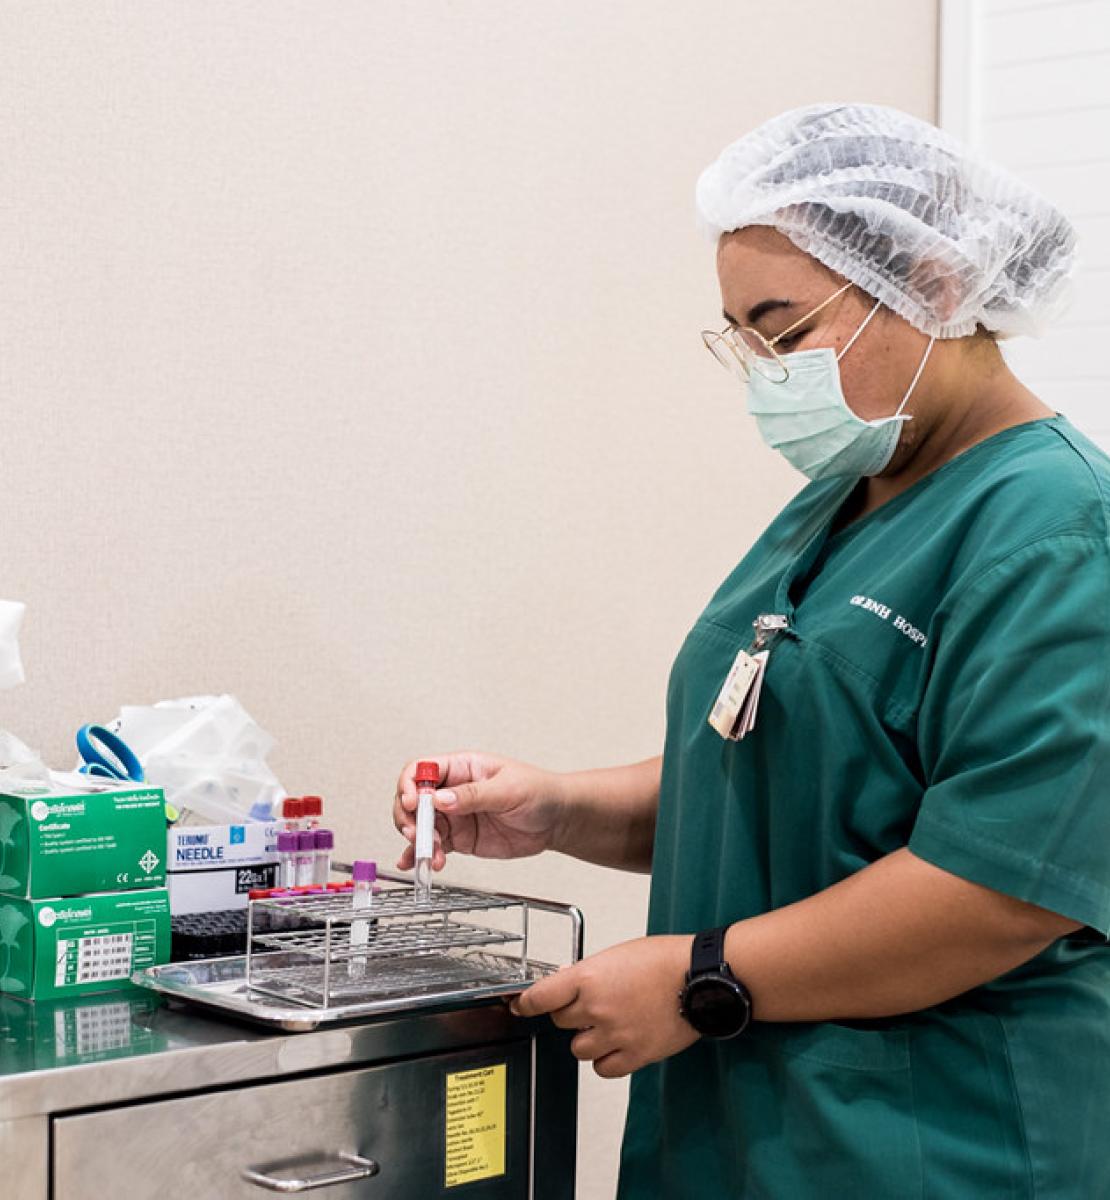 Photo showing a nurse wearing personal protective equipment preparing medical testing materials